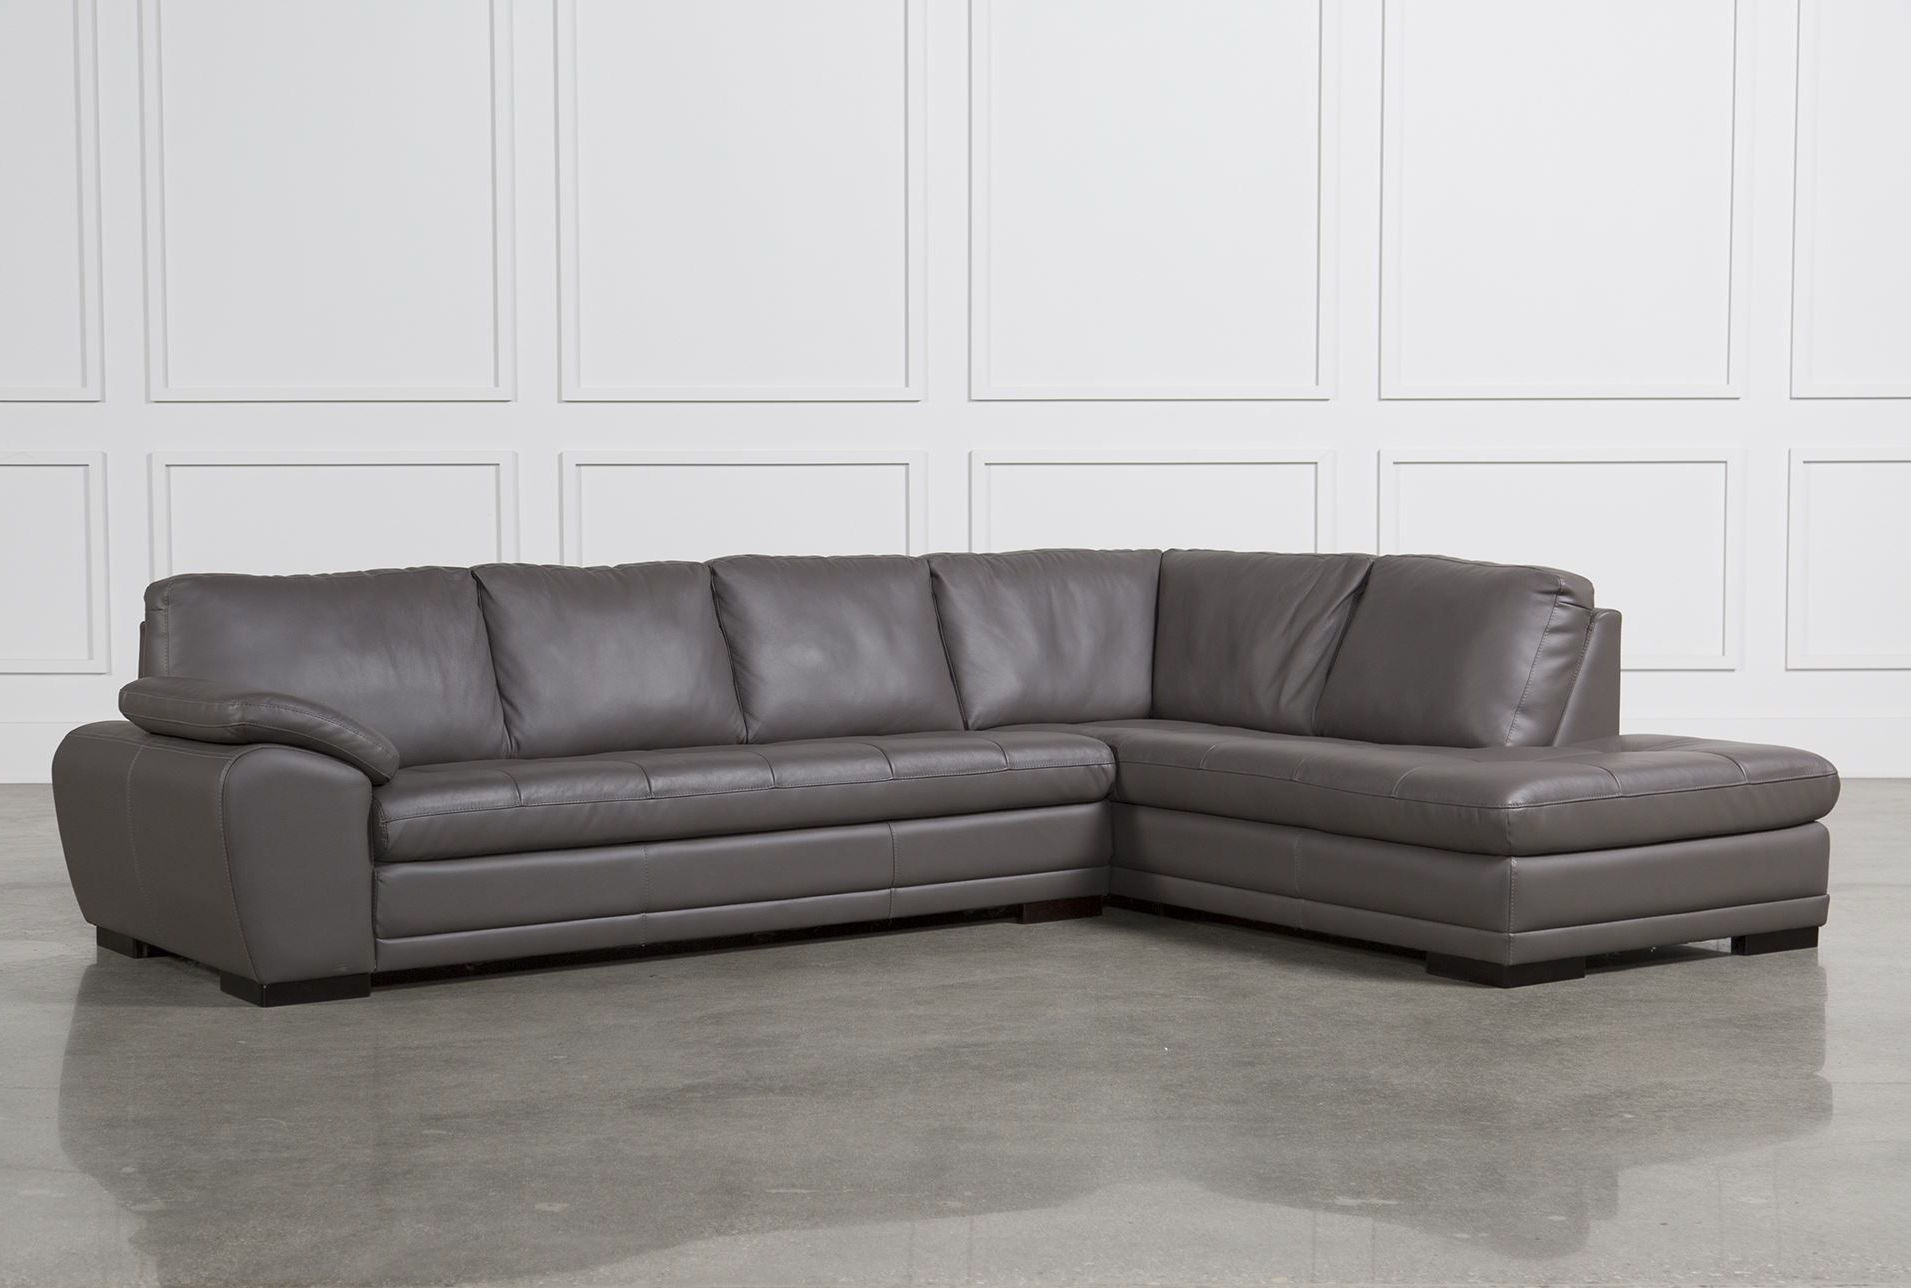 Tatum Dark Grey 2 Piece Sectionals With Laf Chaise